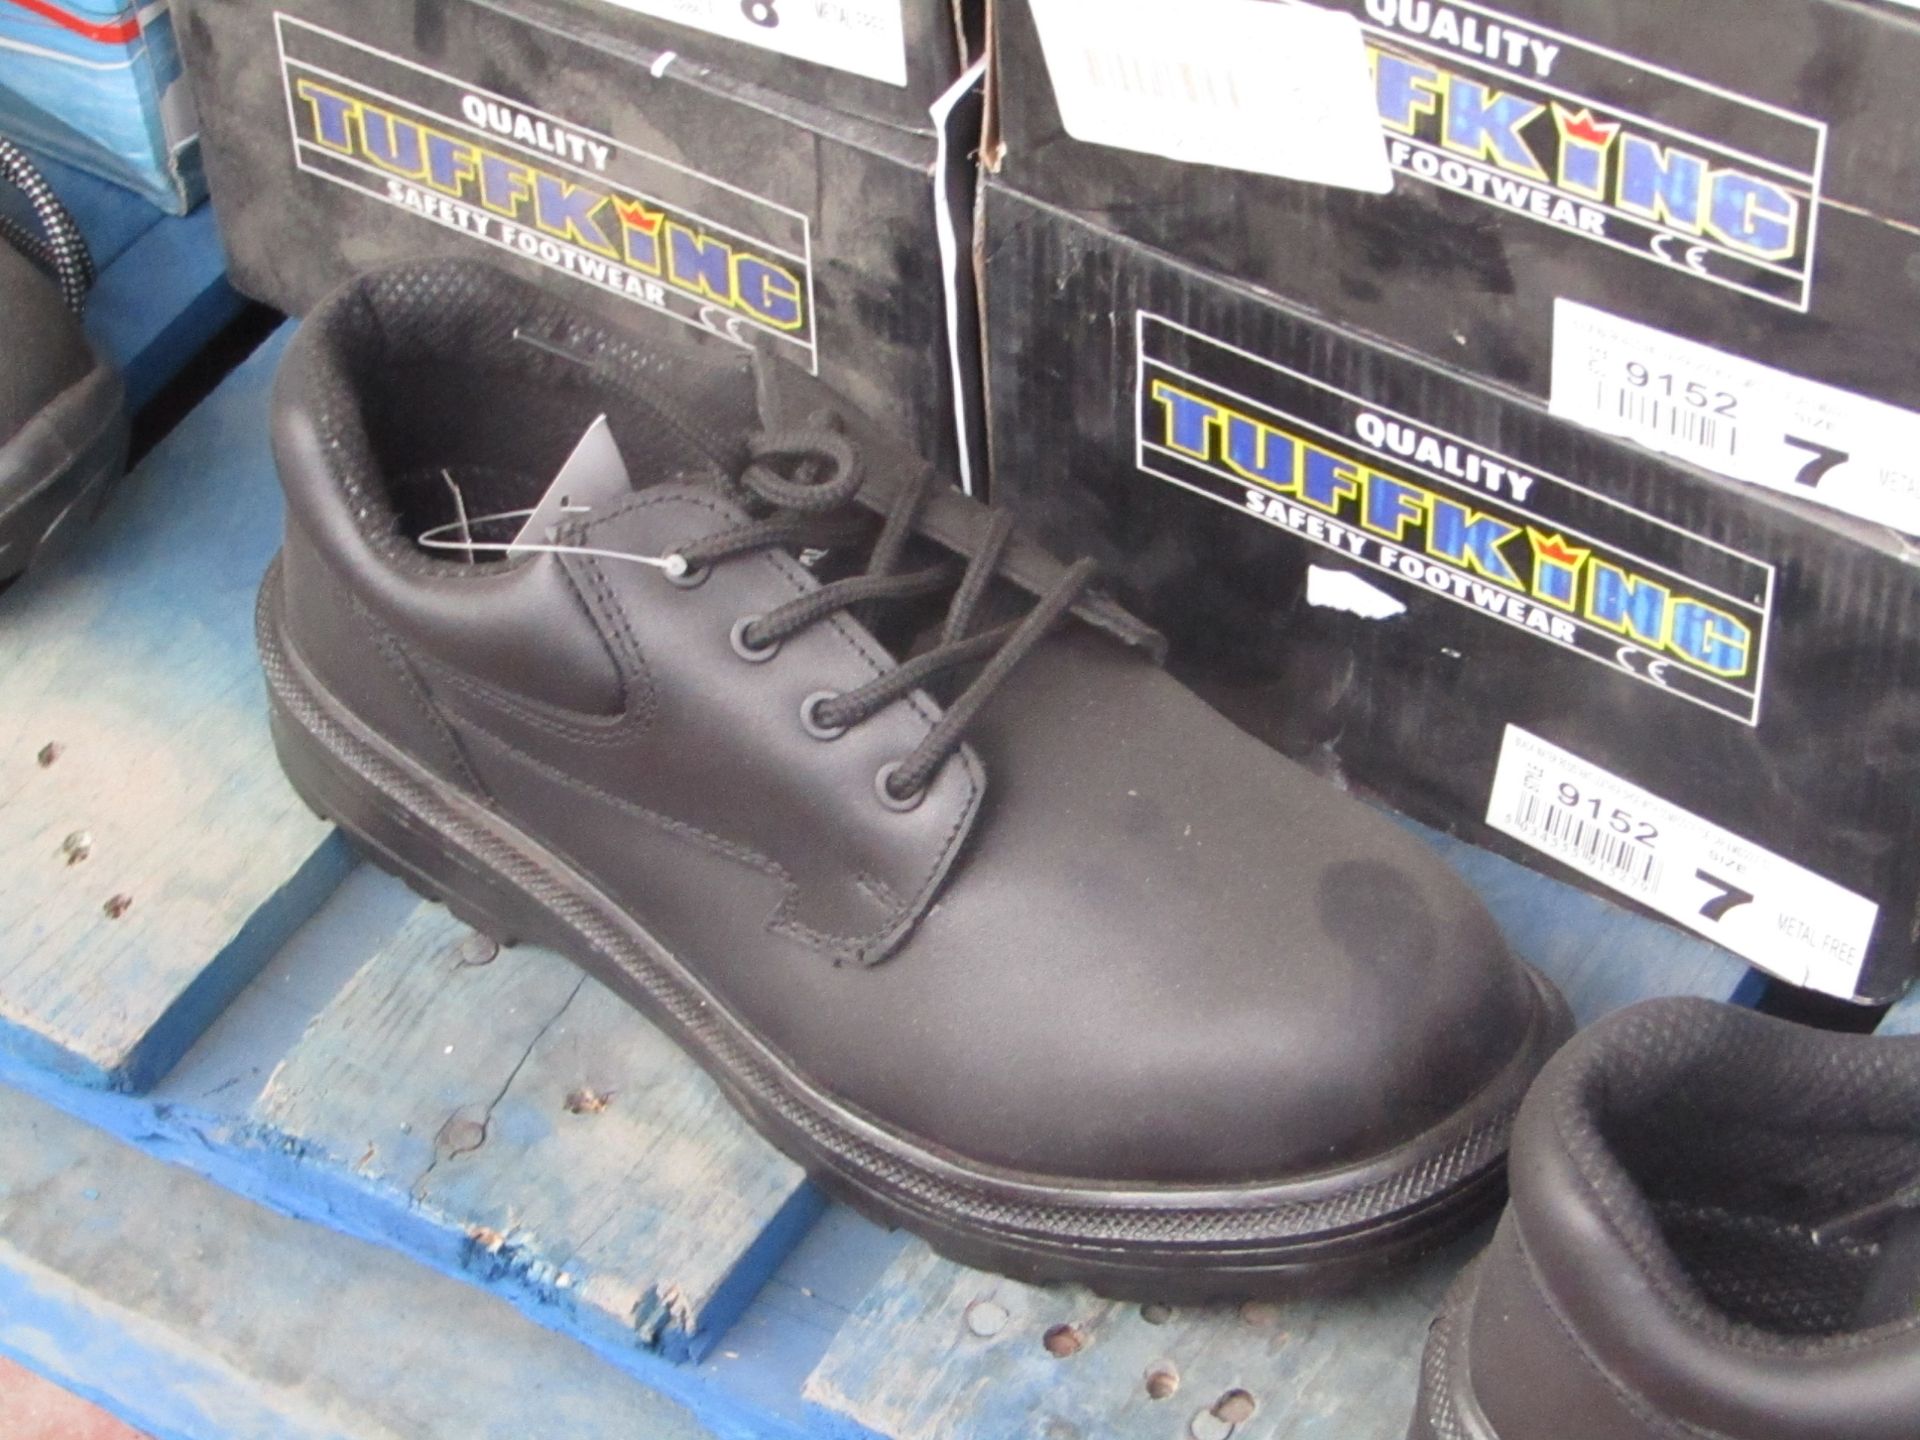 Tuffking Steel Toe Cap Genuine Leather Safety Shoes, new, Size 6, RRP £44.95